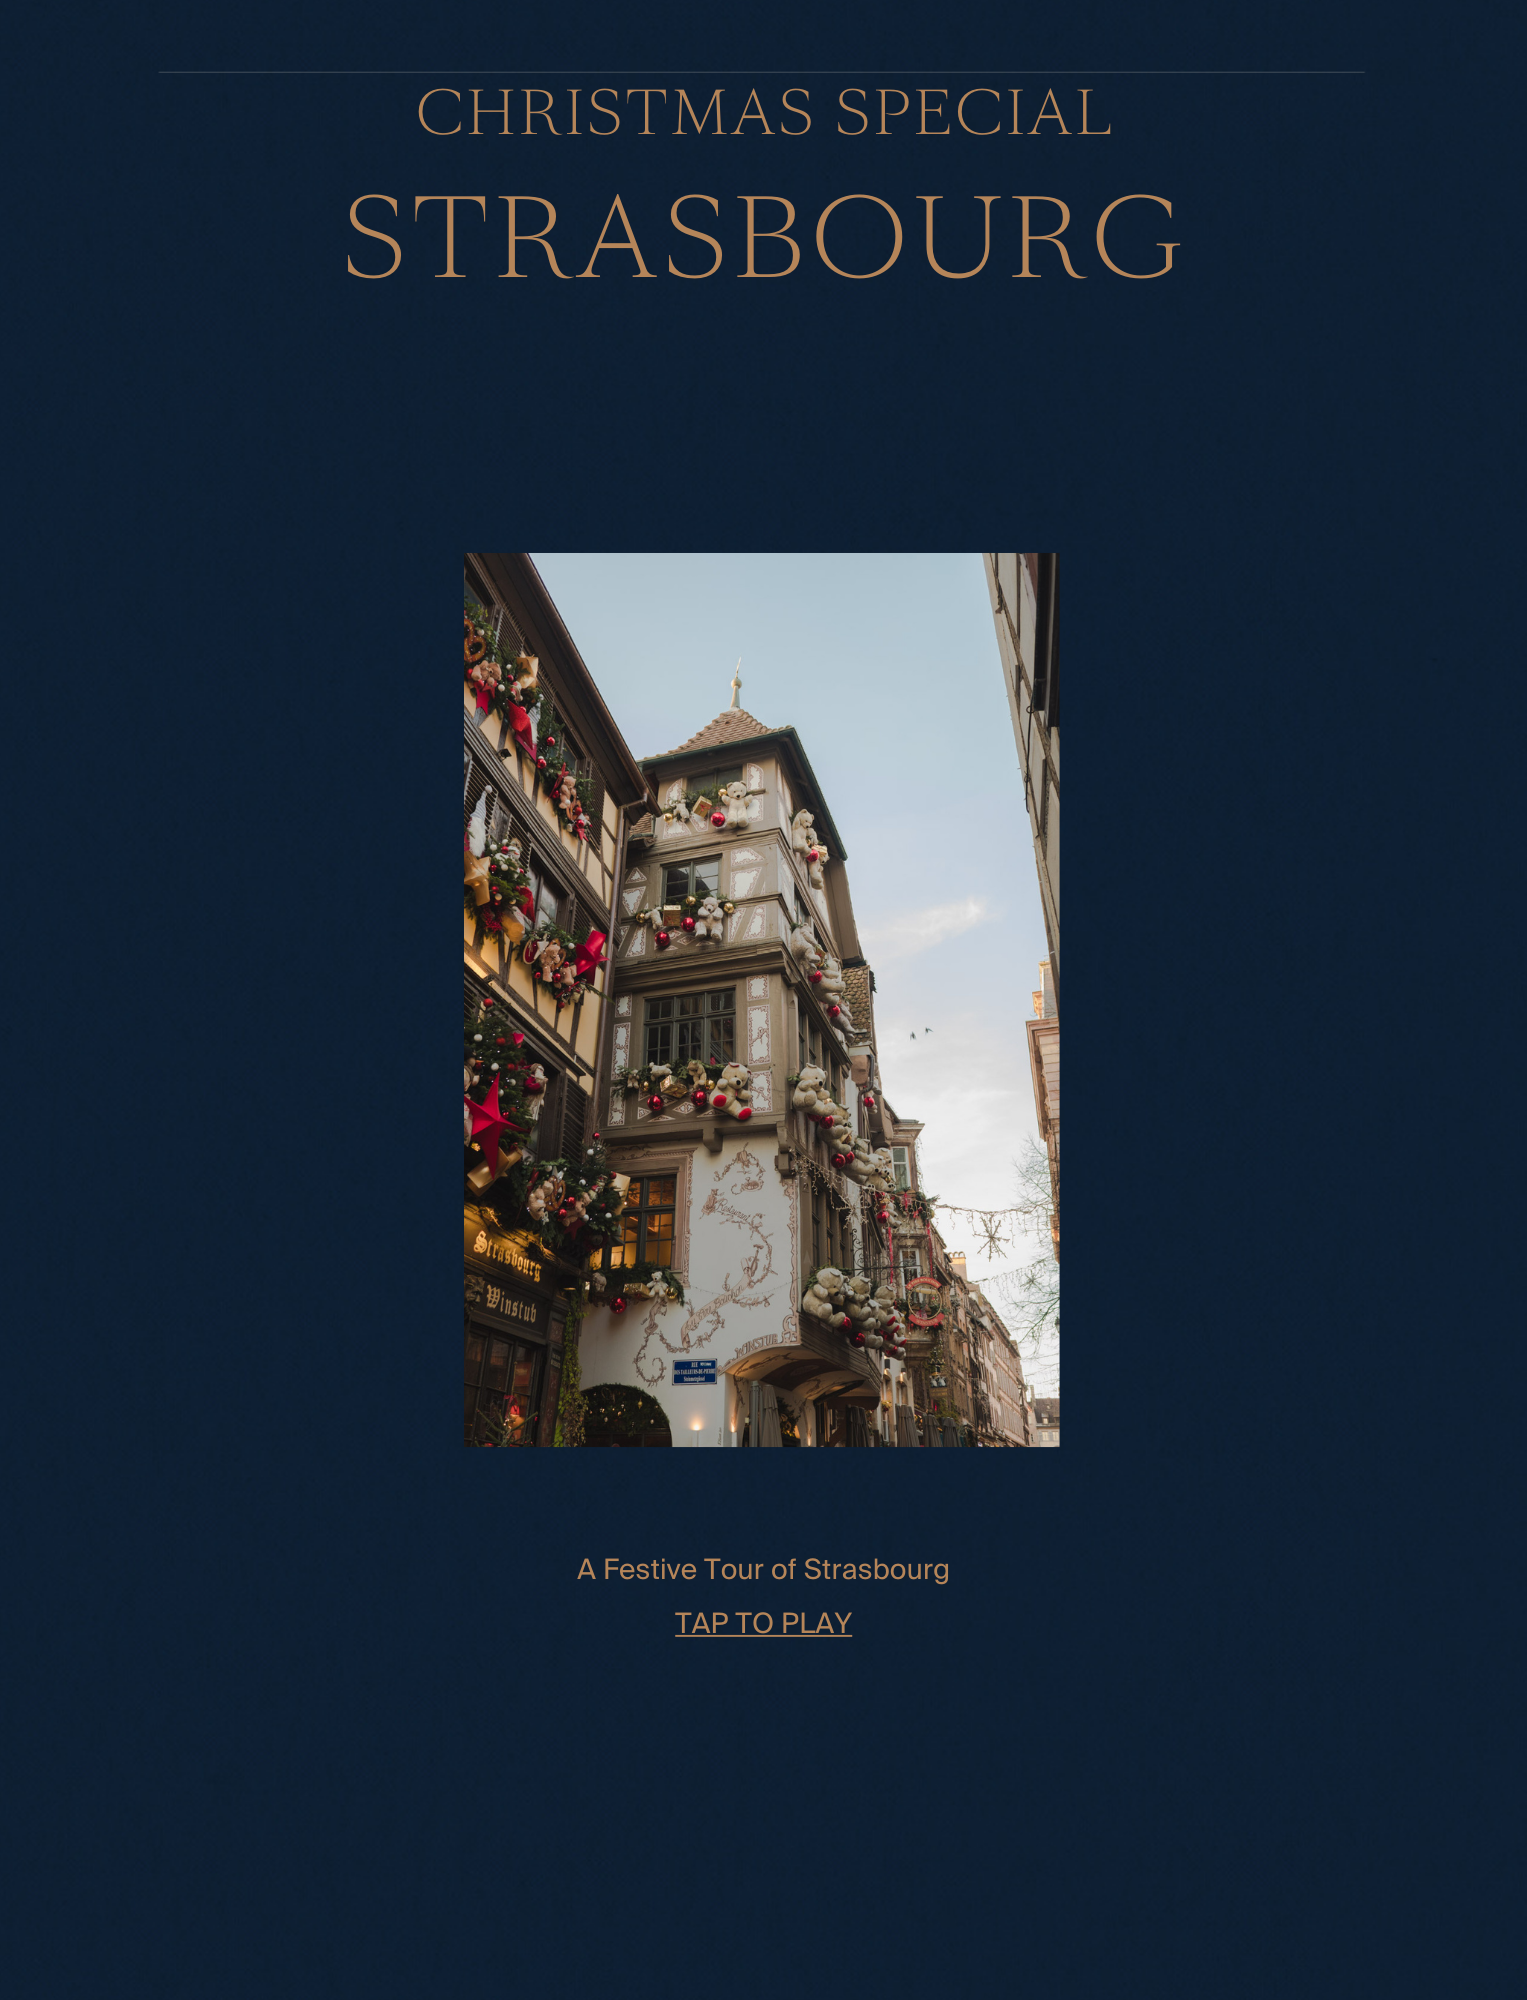 A Guide to Alsace, Christmas Edition - the cover of Strasbourg, by Simply Slow Traveler